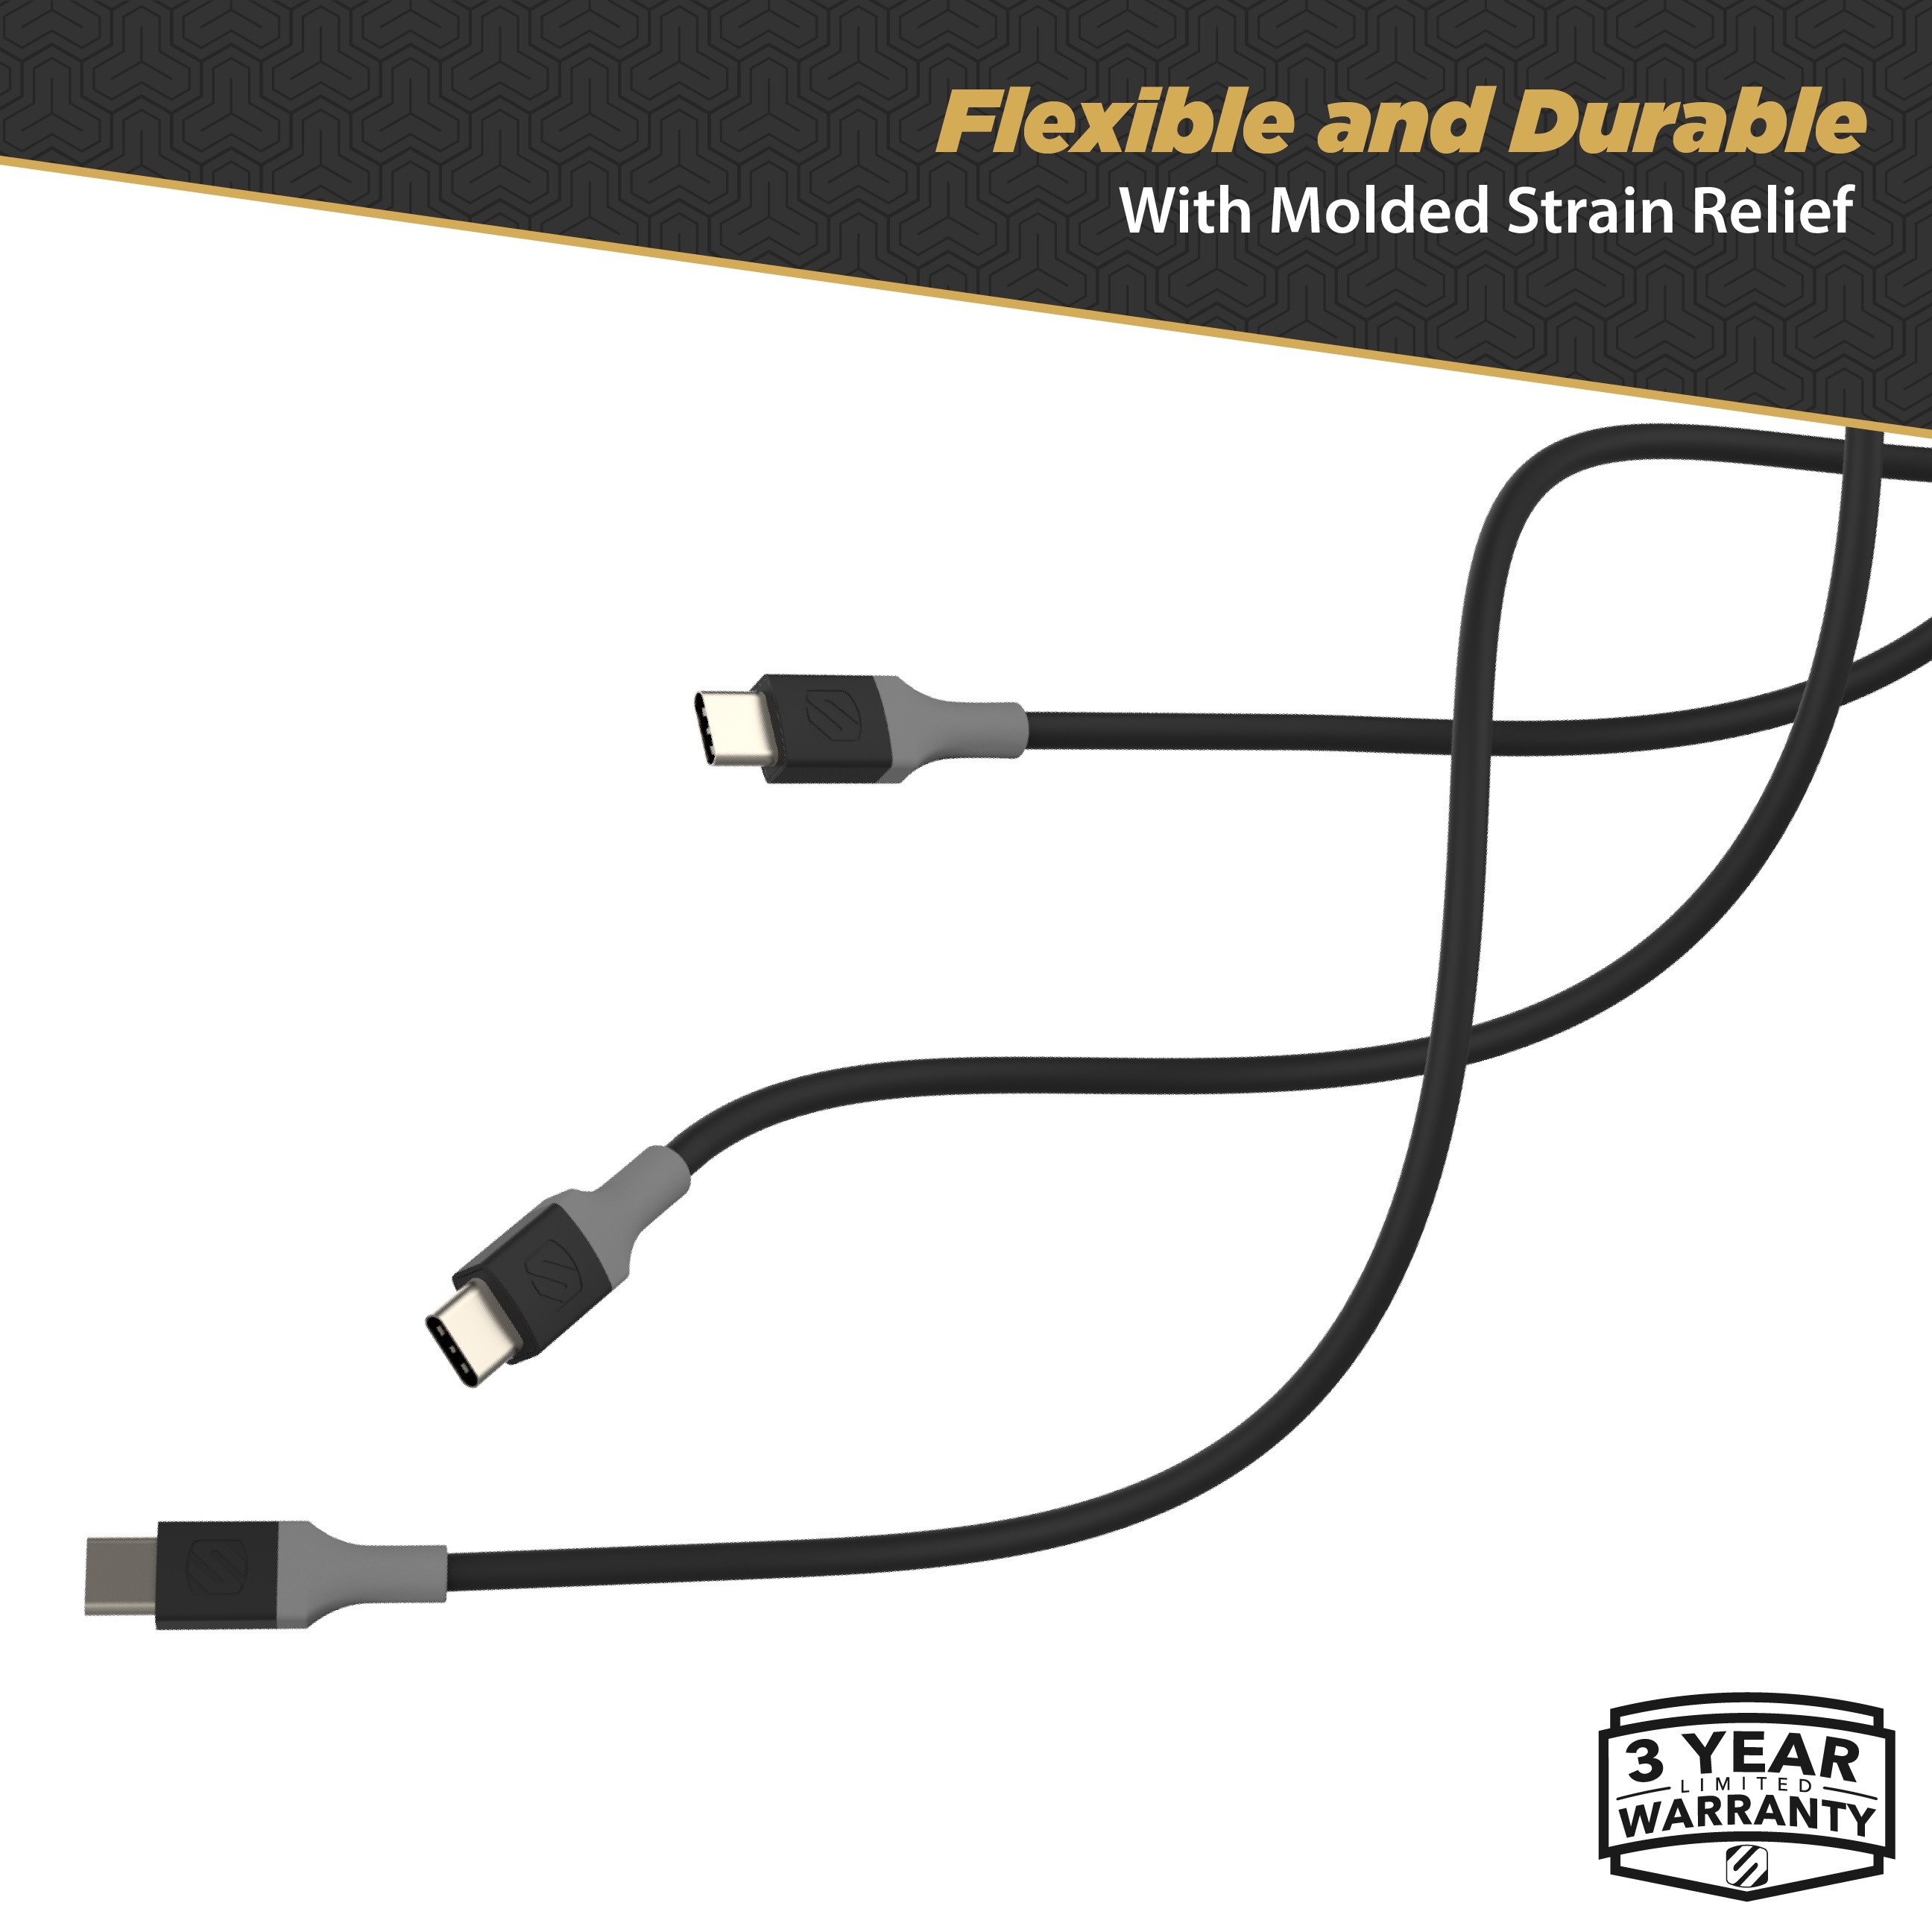 Scosche Ca4by-Sp Strikeline USB-A to USB-C & Sync Cable 4 ft. Space Gray - image 3 of 6